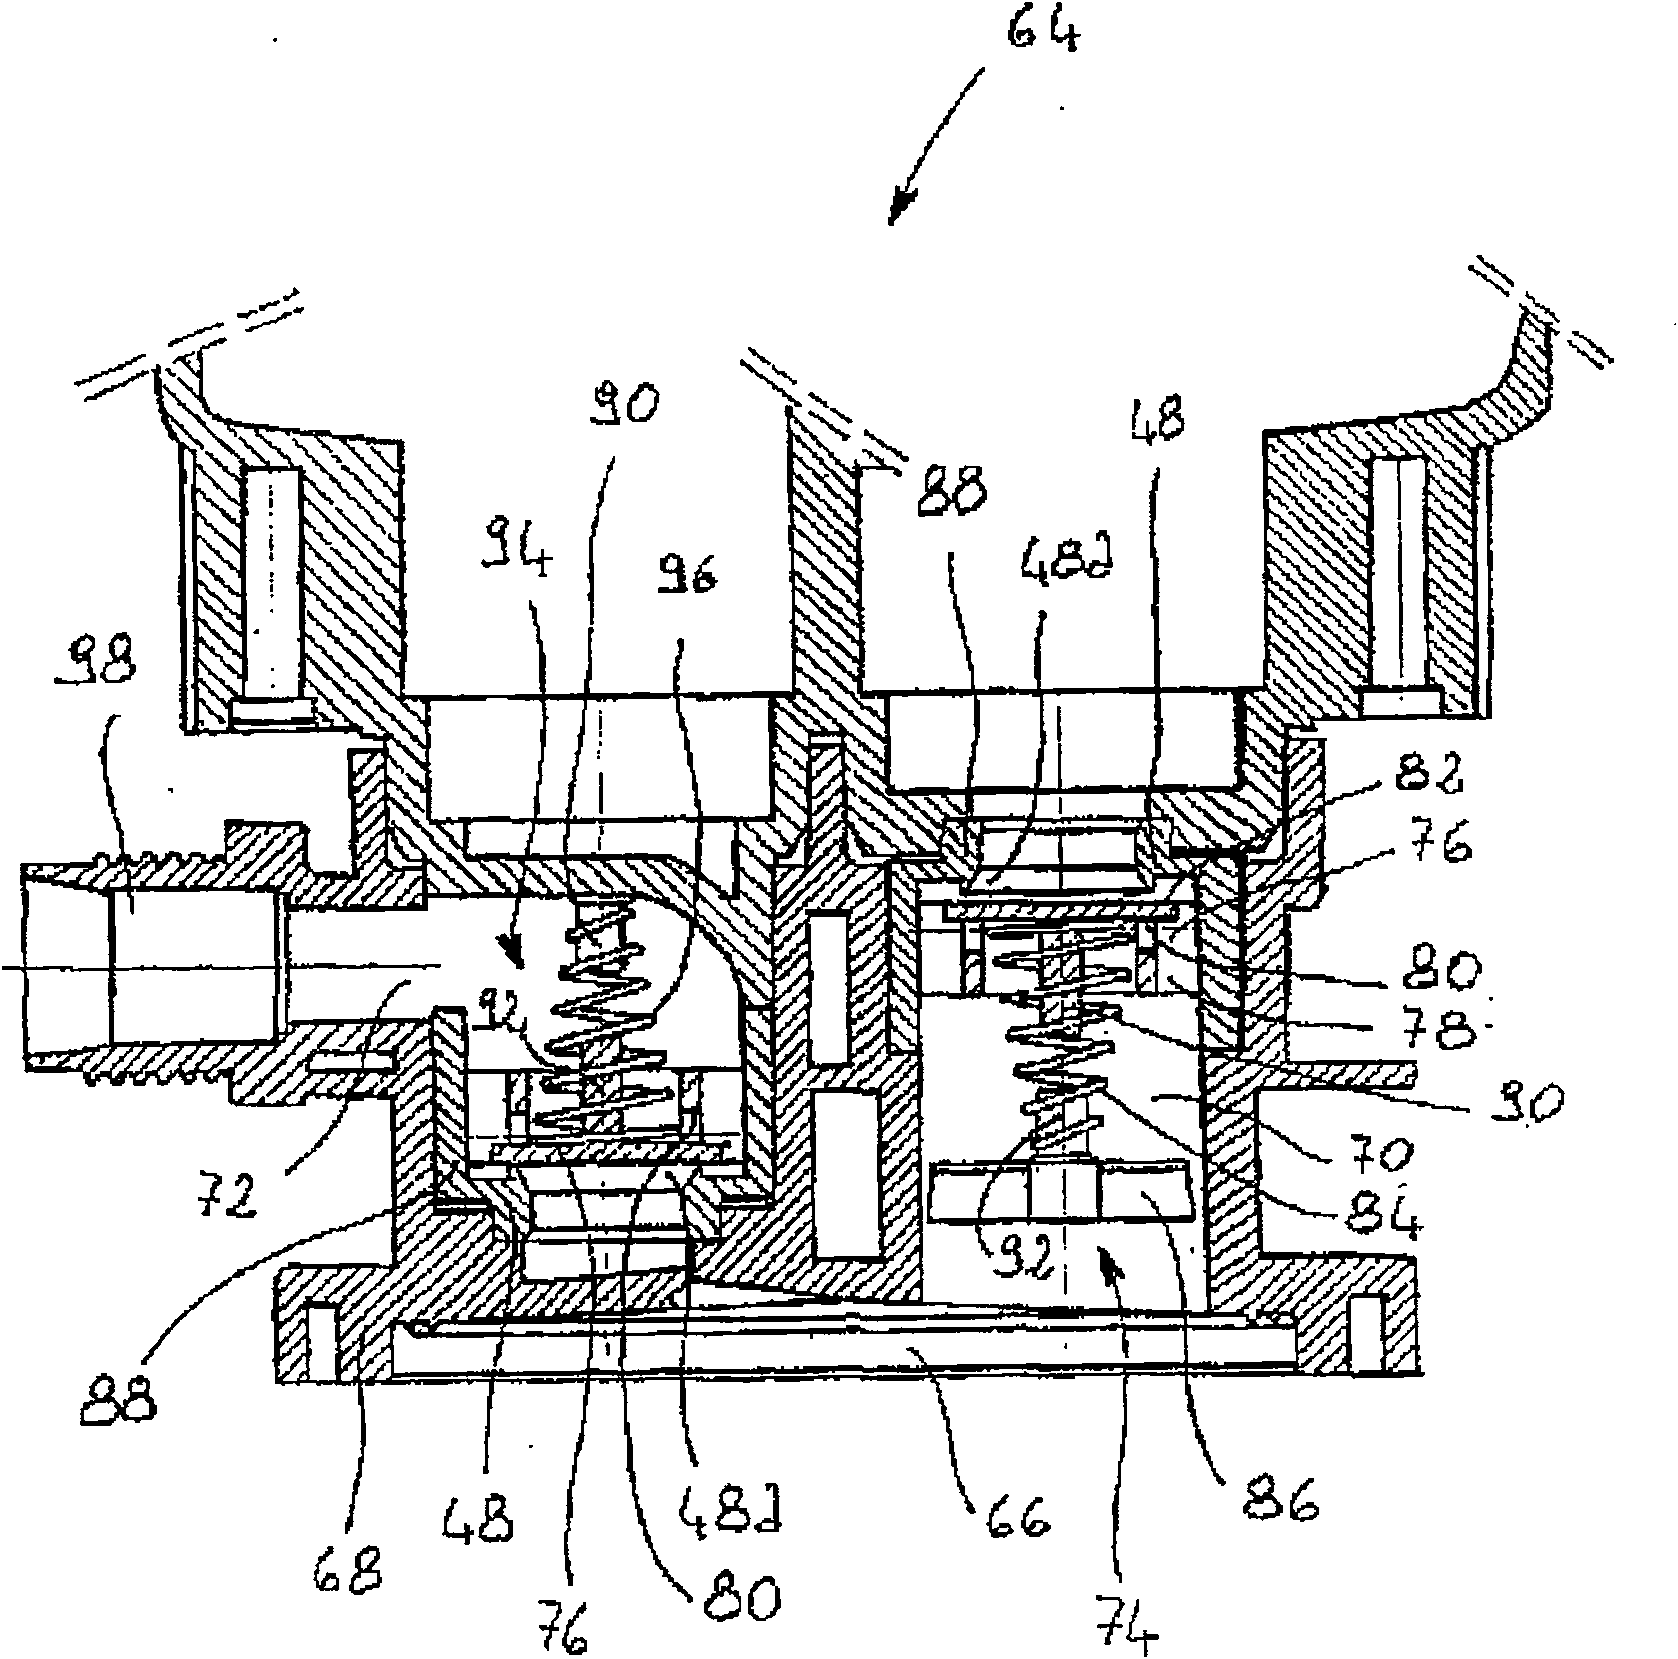 A fluid-dispensing circuit with check valves